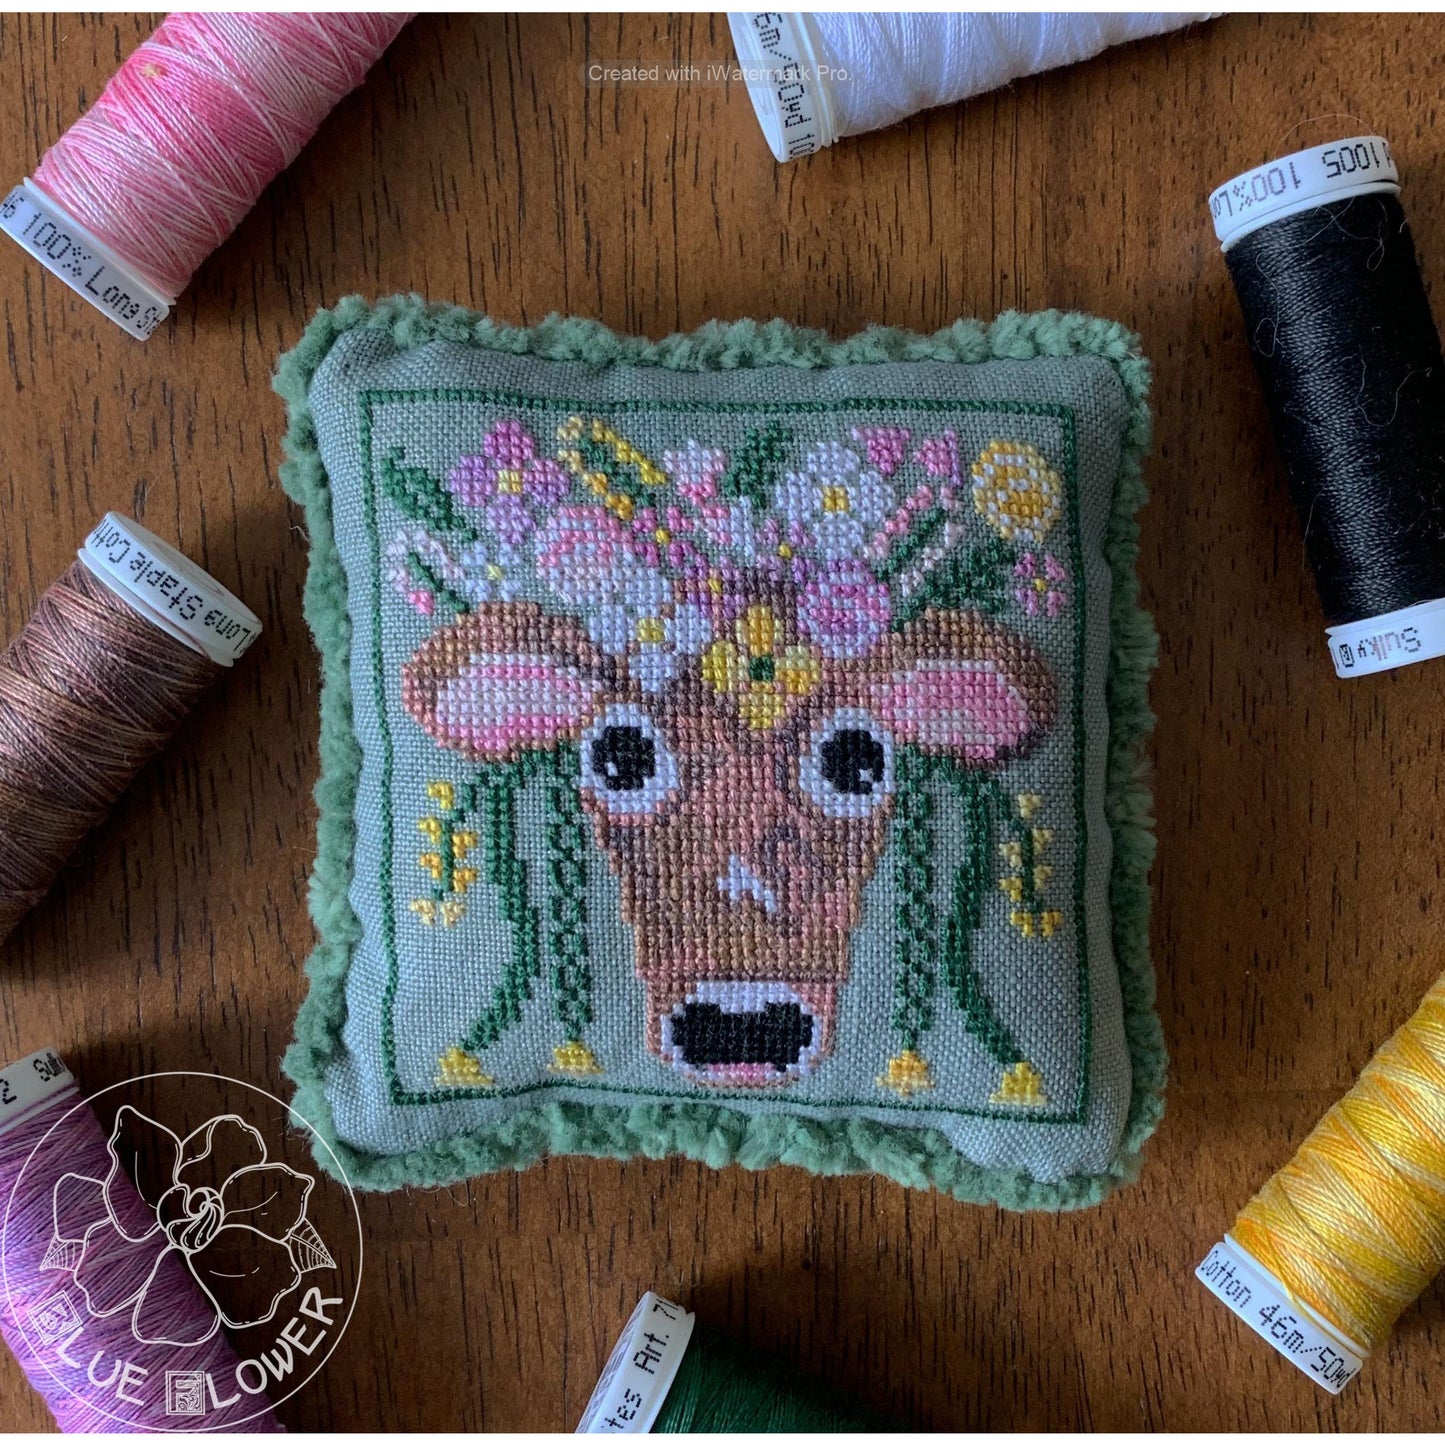 The Moo The Merrier 2021 Free Pattern